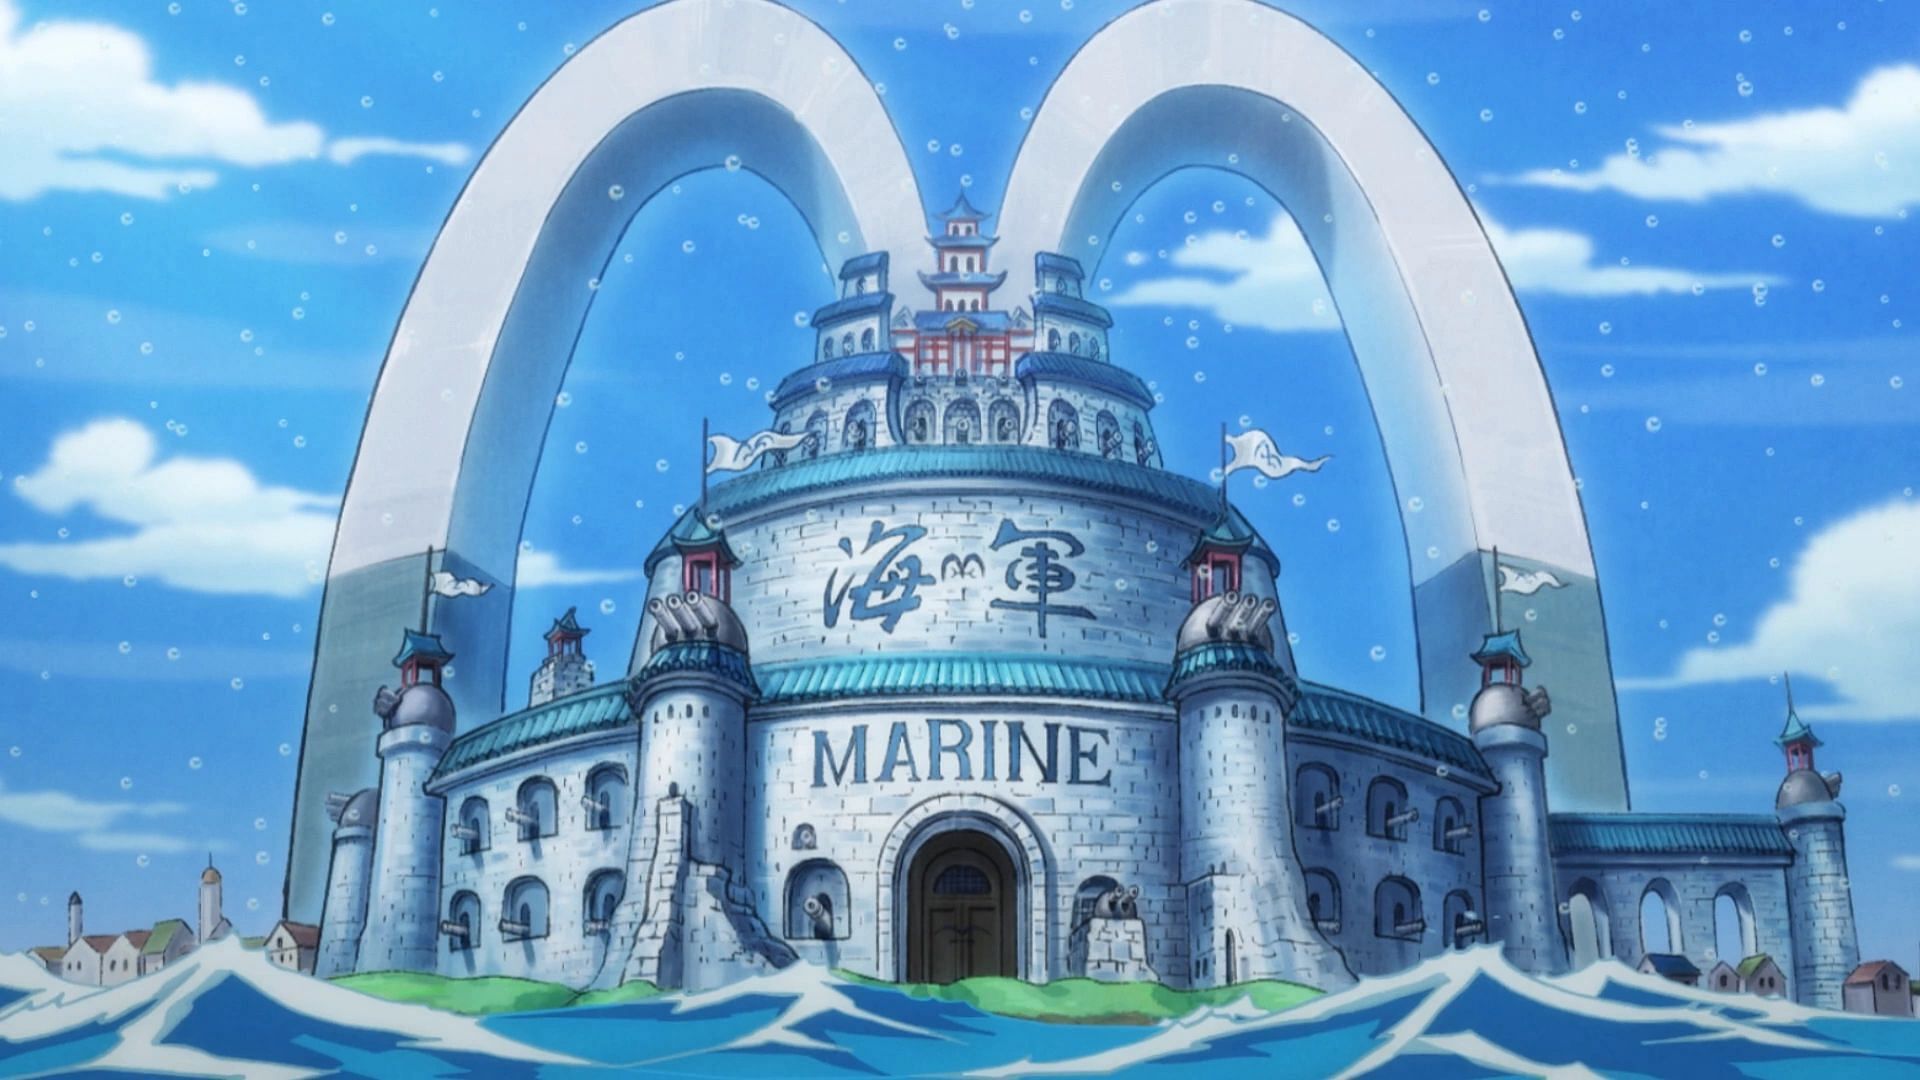 SWORD is a special unit within the Navy (Image via Toei Animation, One Piece)